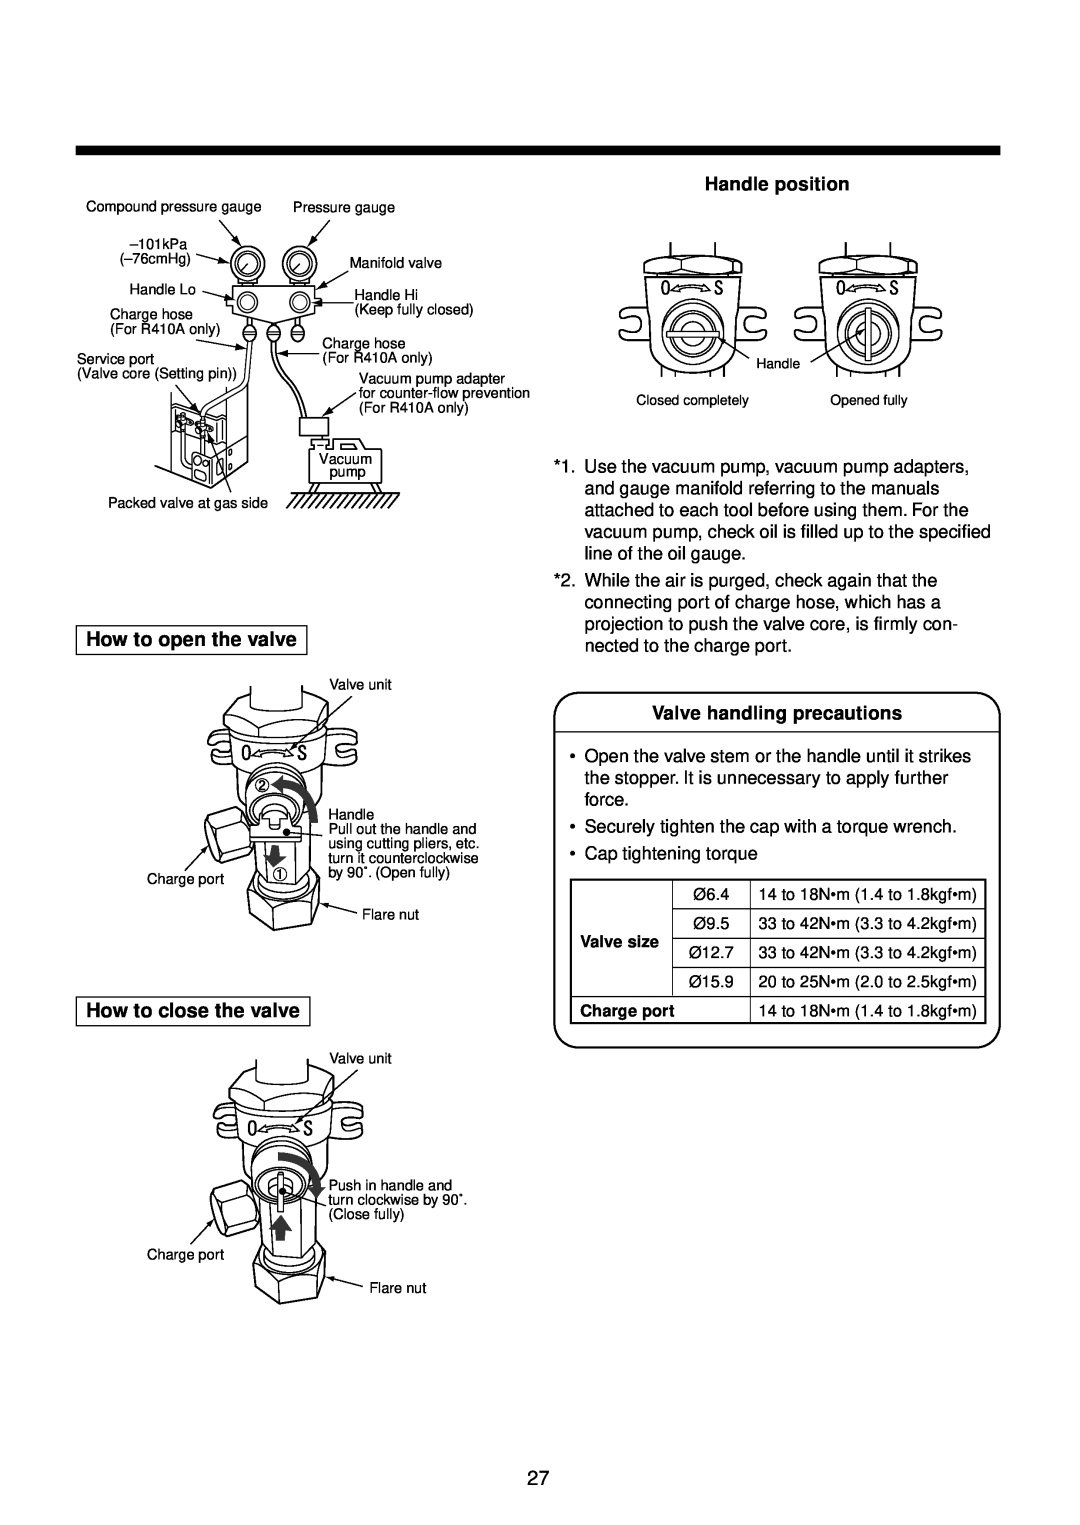 Toshiba R410A service manual How to open the valve, How to close the valve, Handle position, Valve handling precautions 